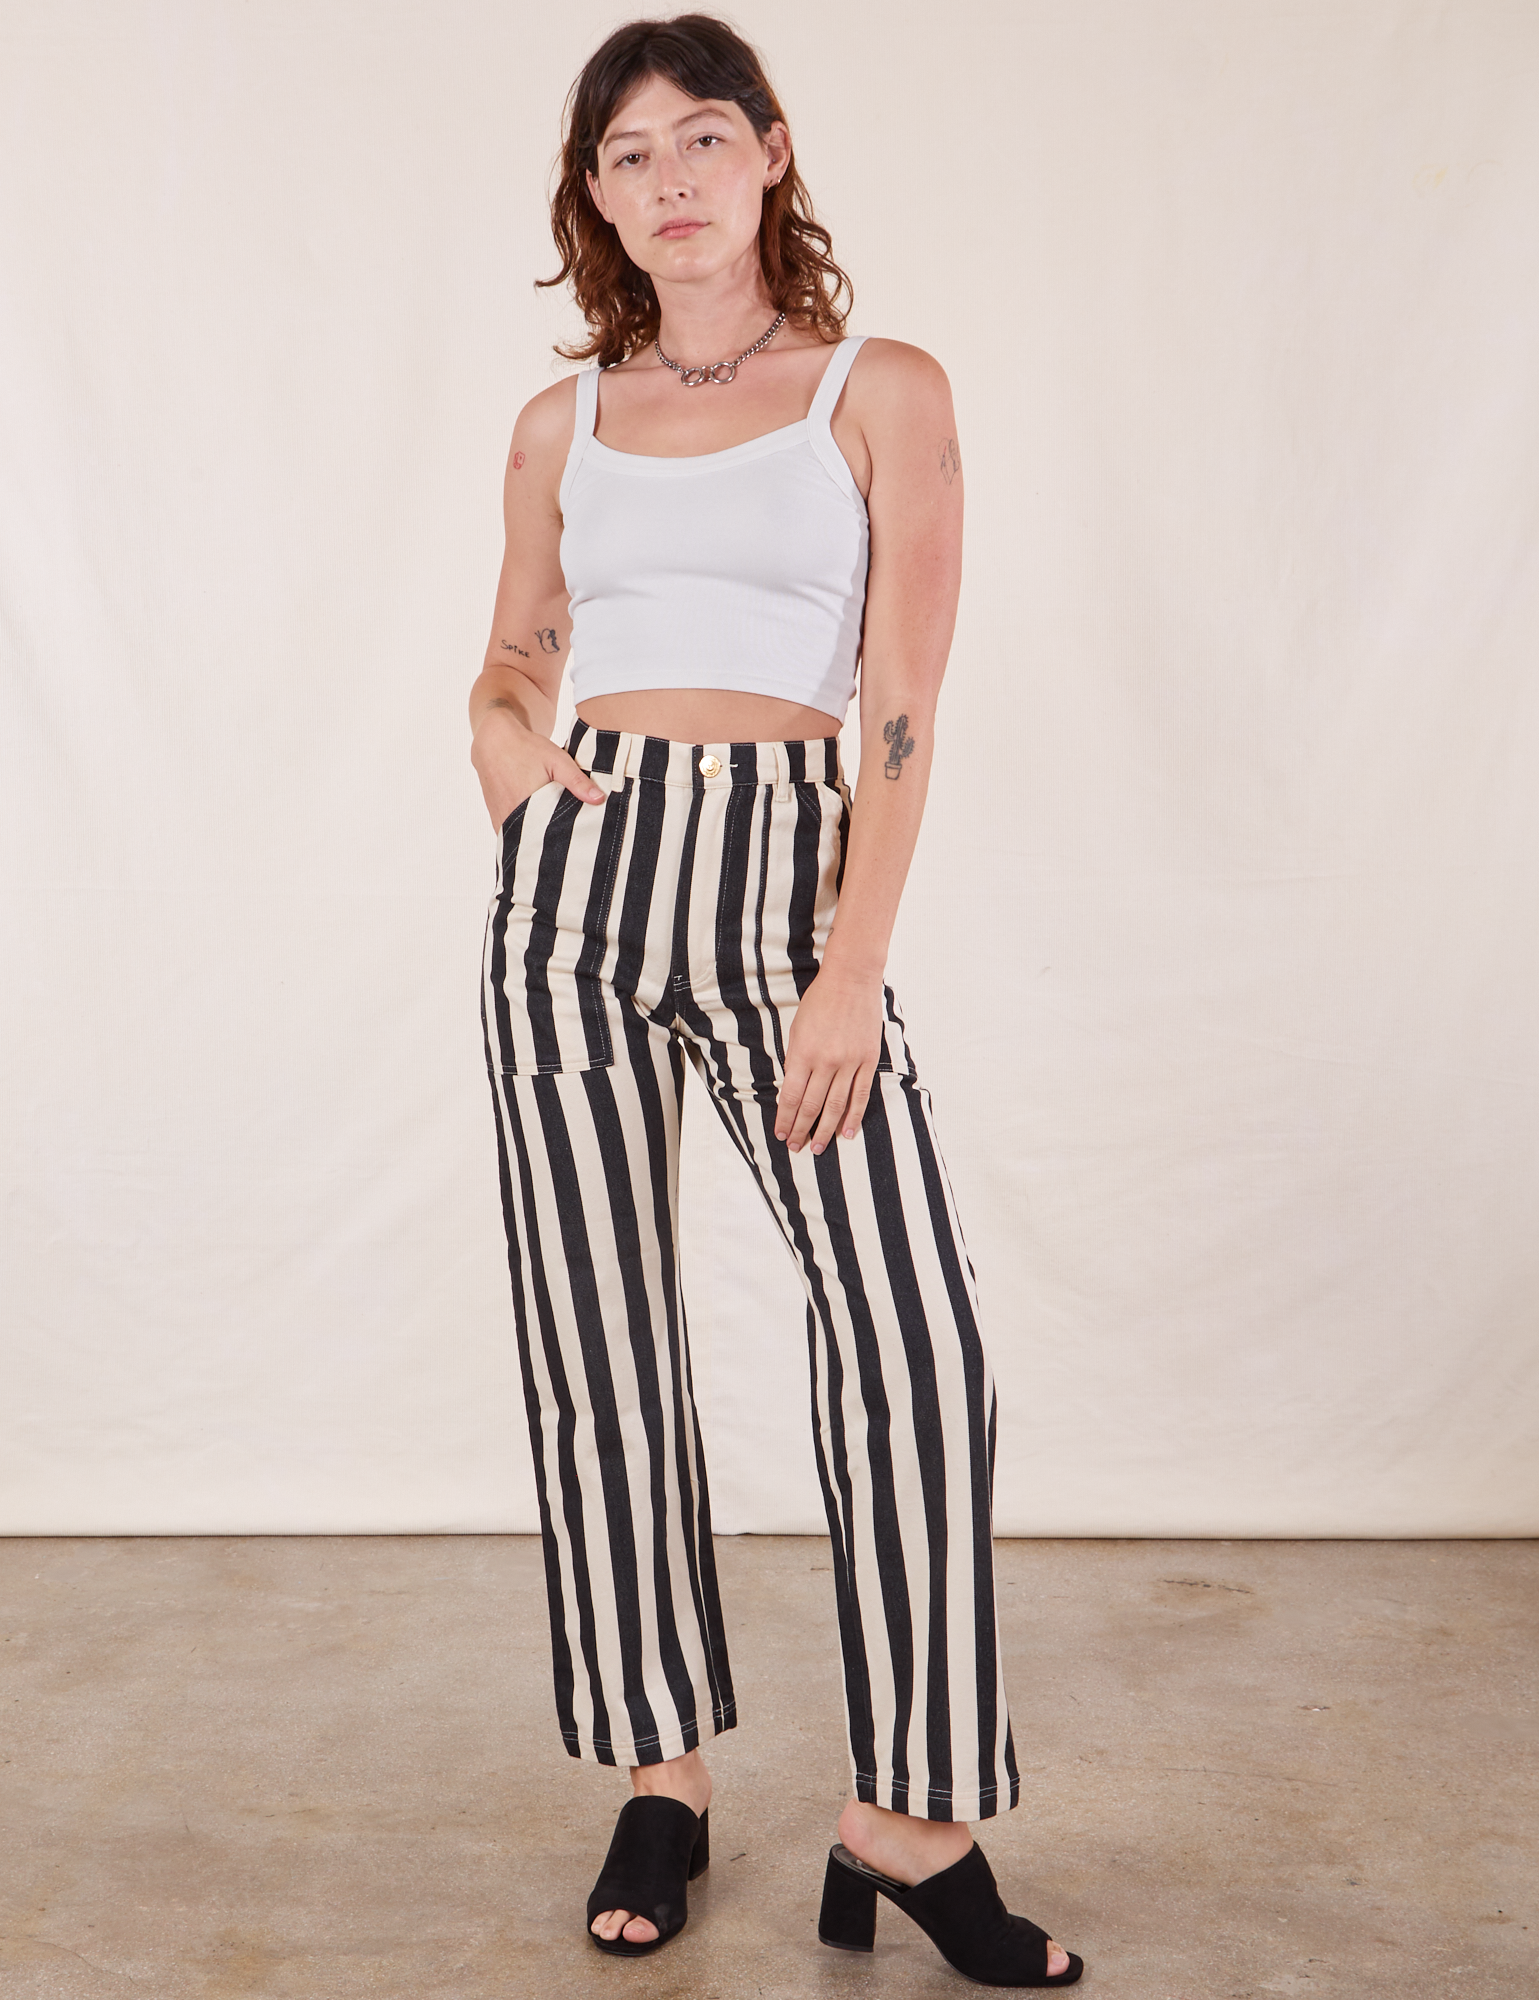 Alex is 5&#39;8&quot; and wearing XS Black Striped Work Pants in White paired with vintage off-white Cropped Cami